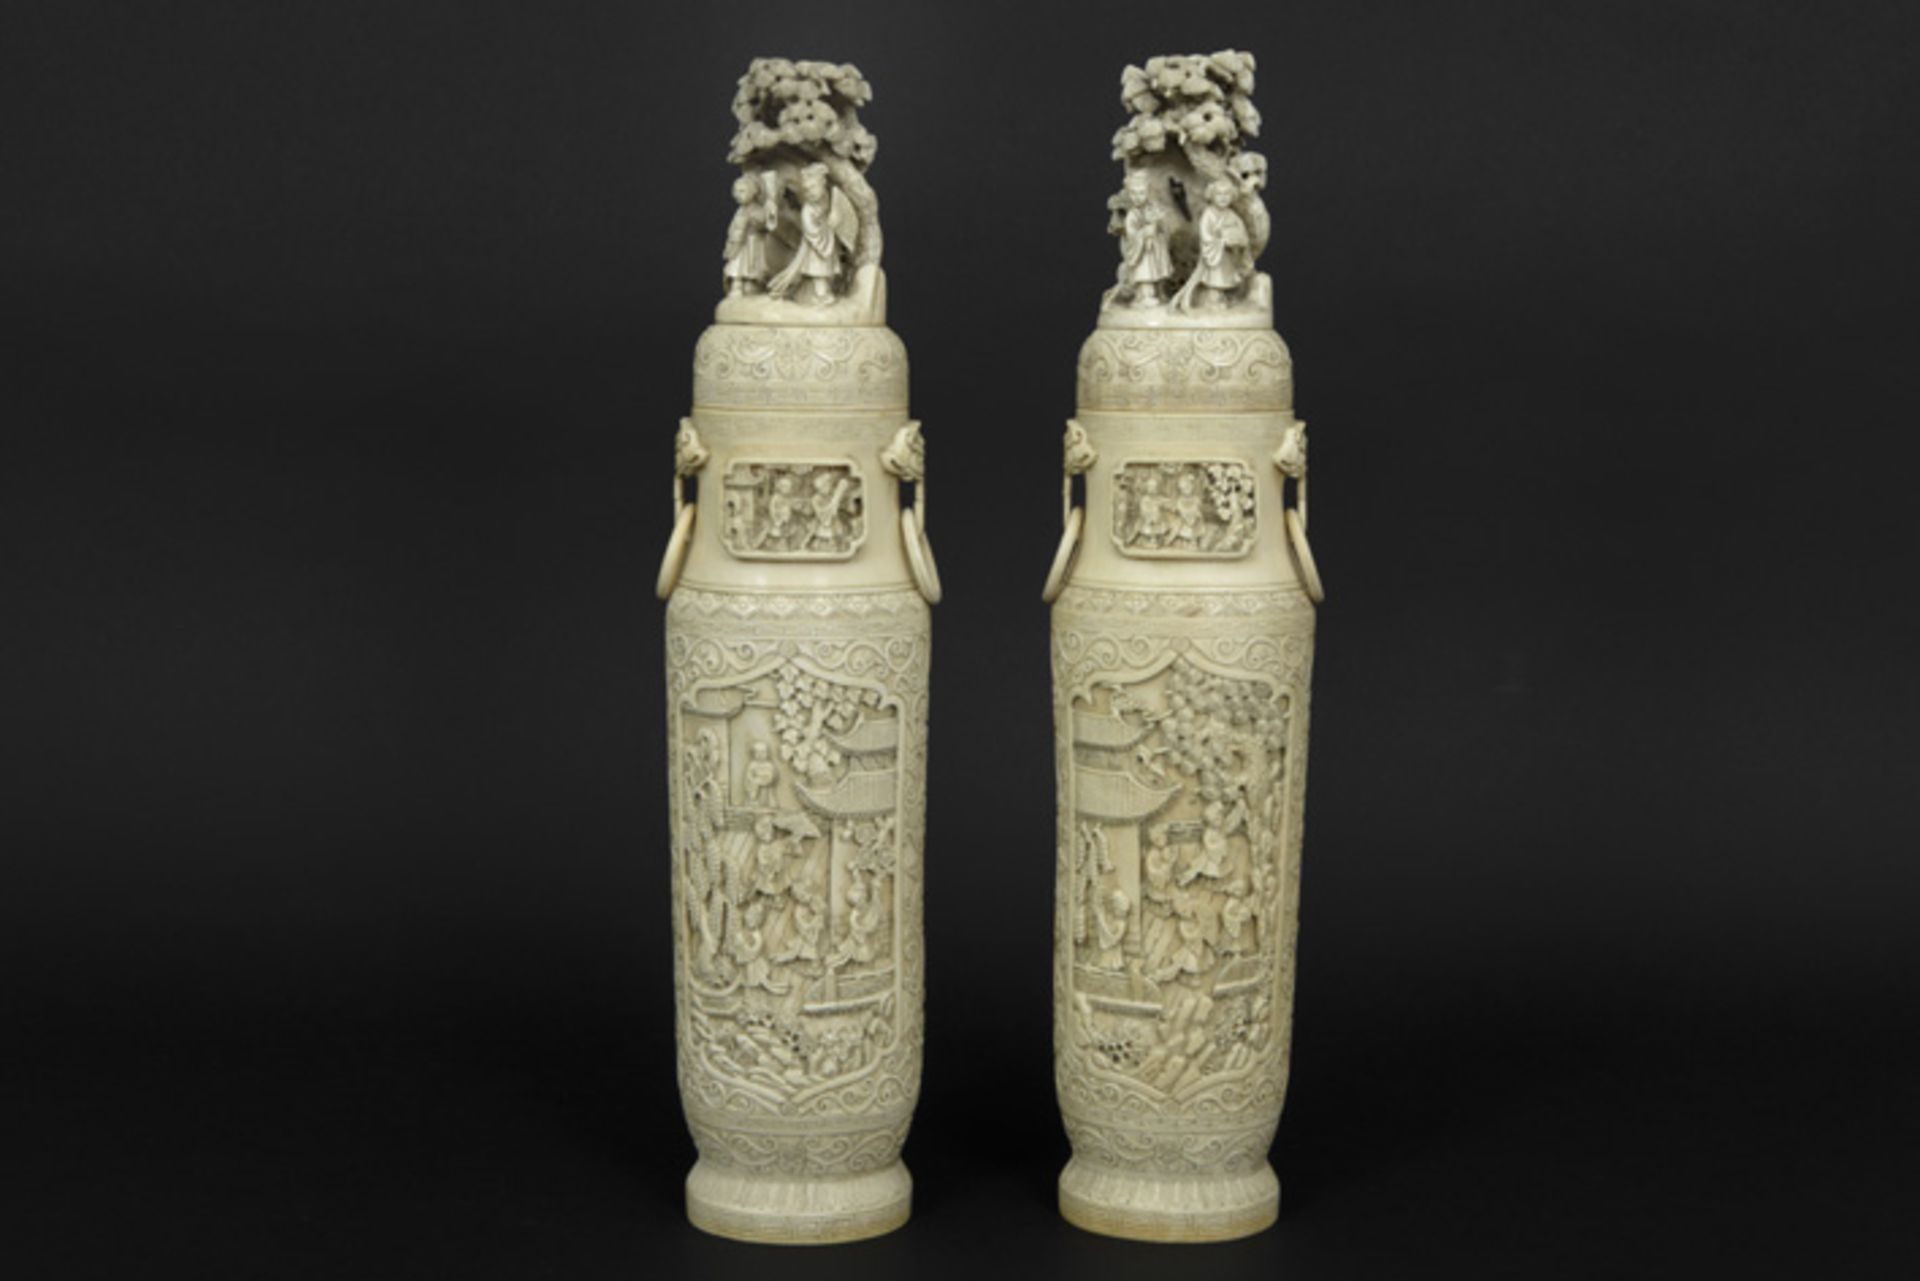 pair of 'antique' Chinese lidded vases in ivory with finely carved court scenes || Paar Chinese